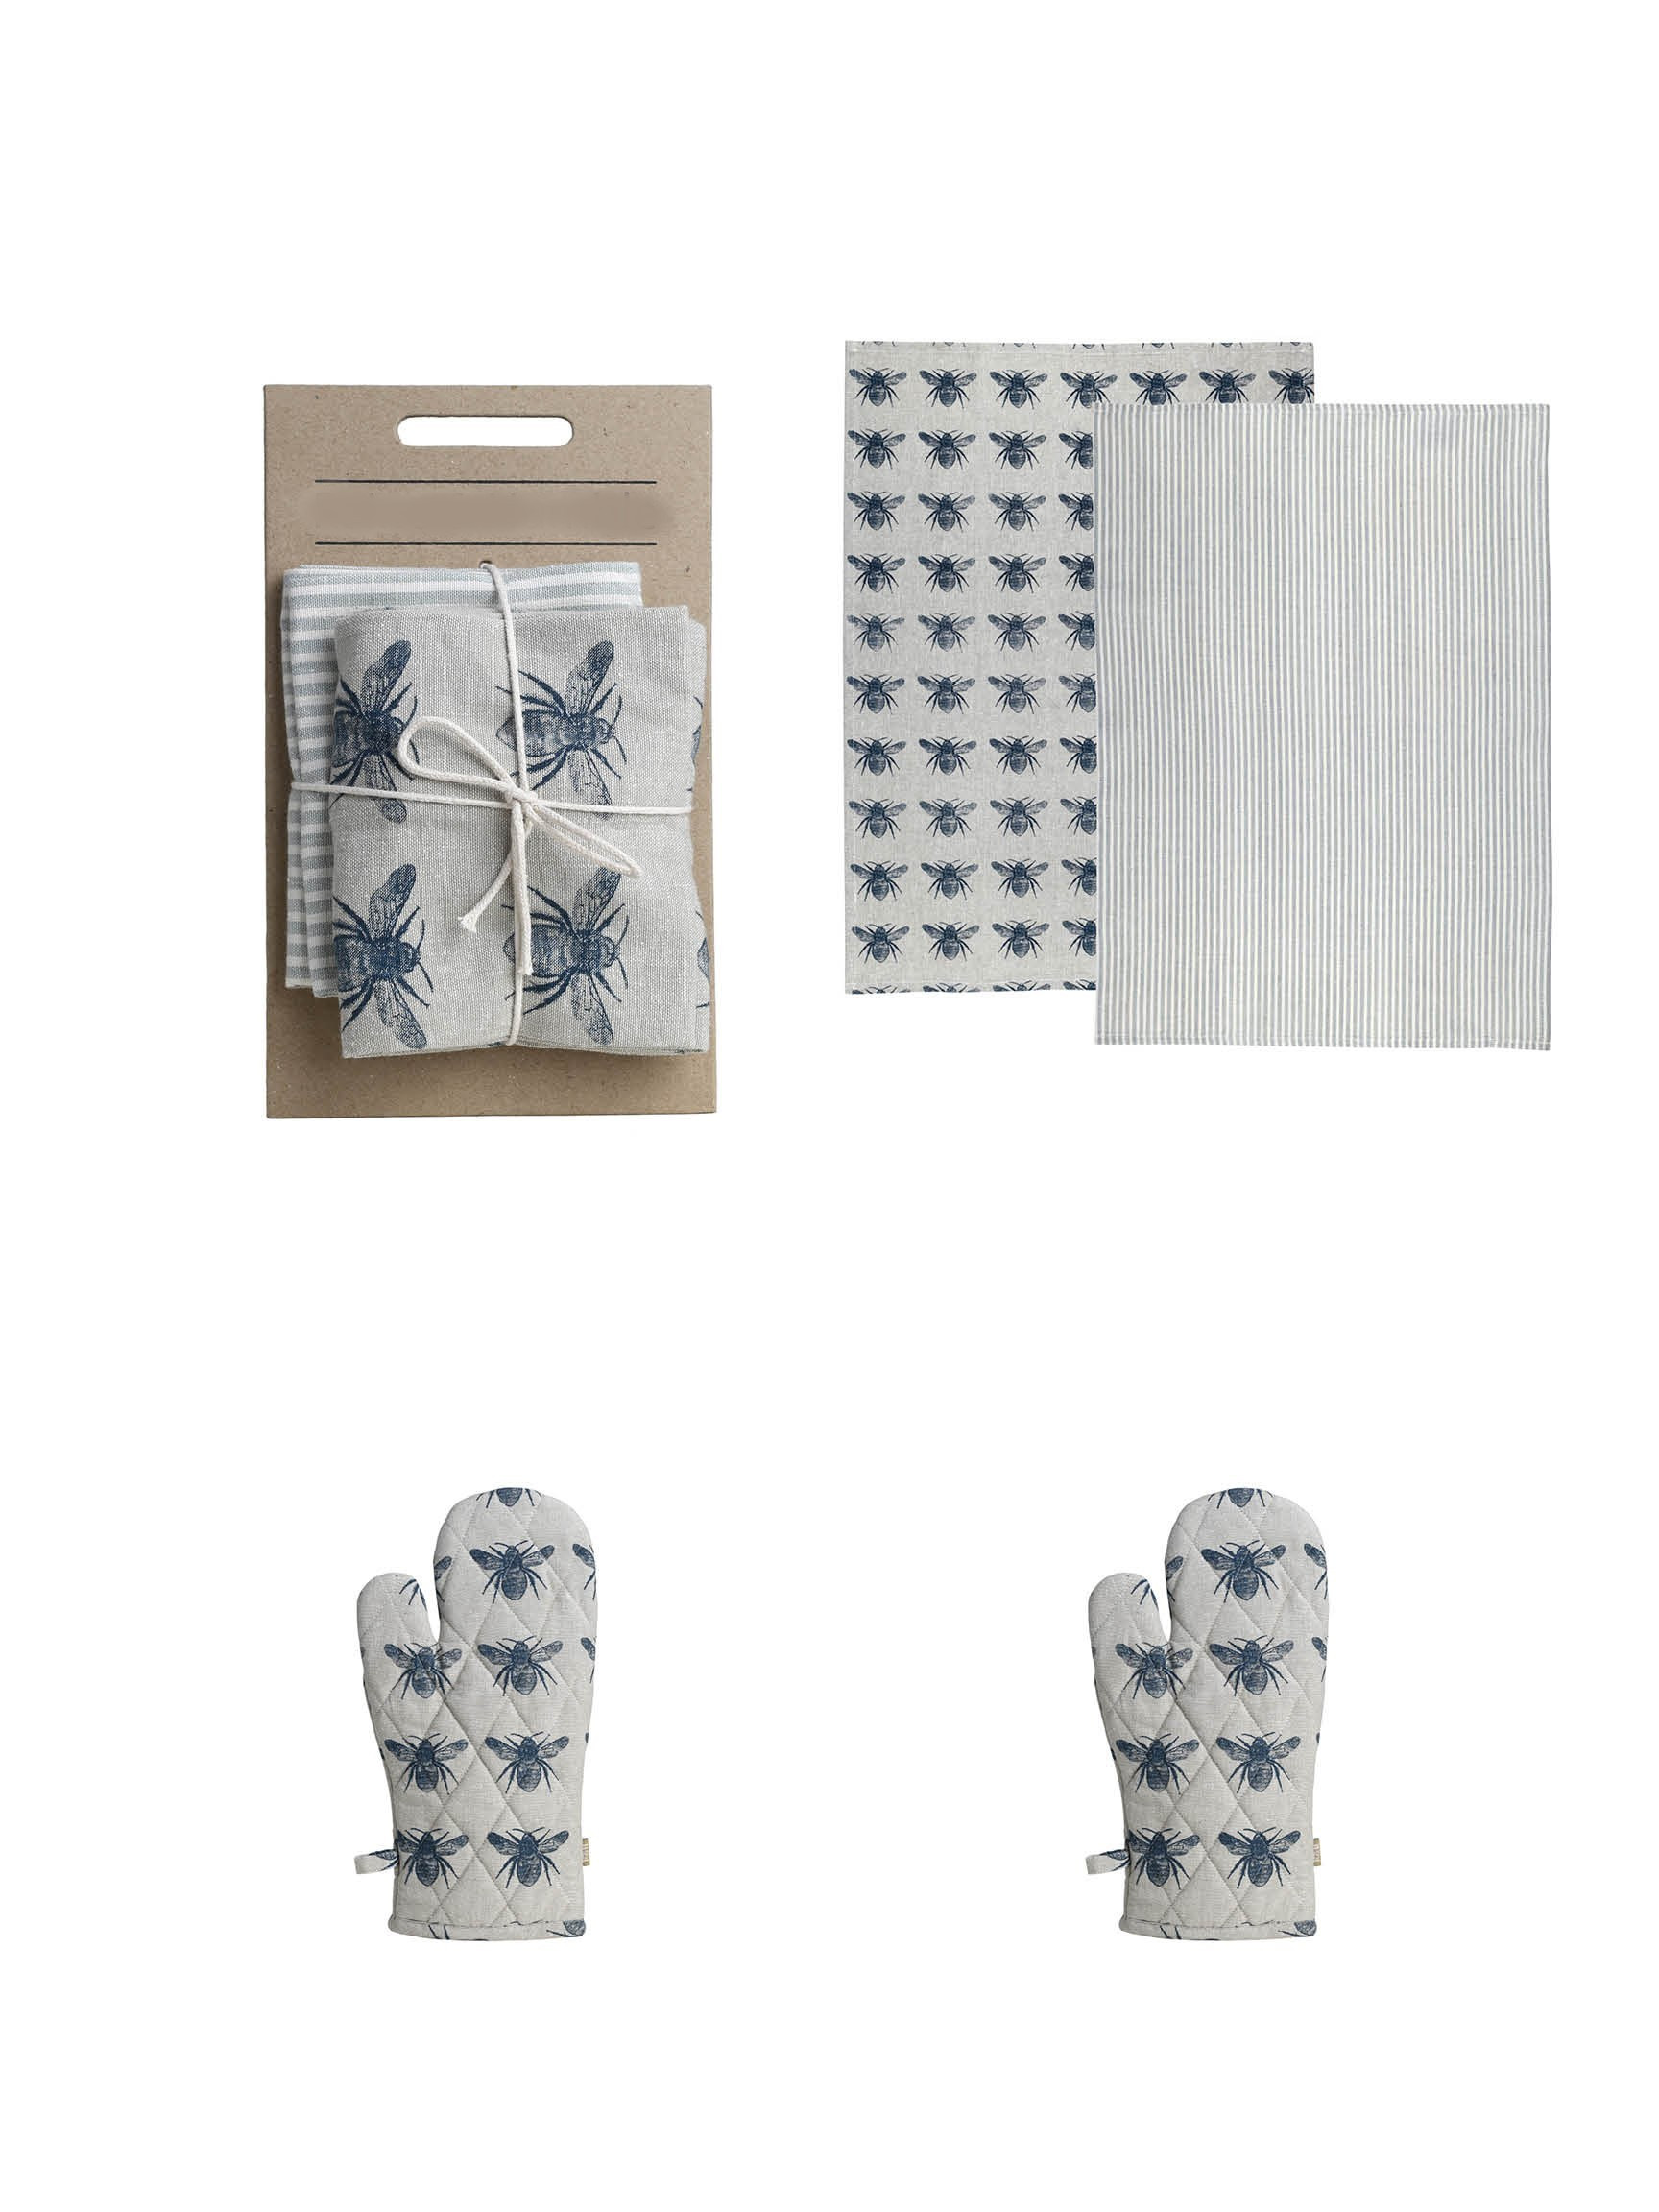 Set of Two Tea Towels with Navy Blue Bumble Bee Oven Gloves